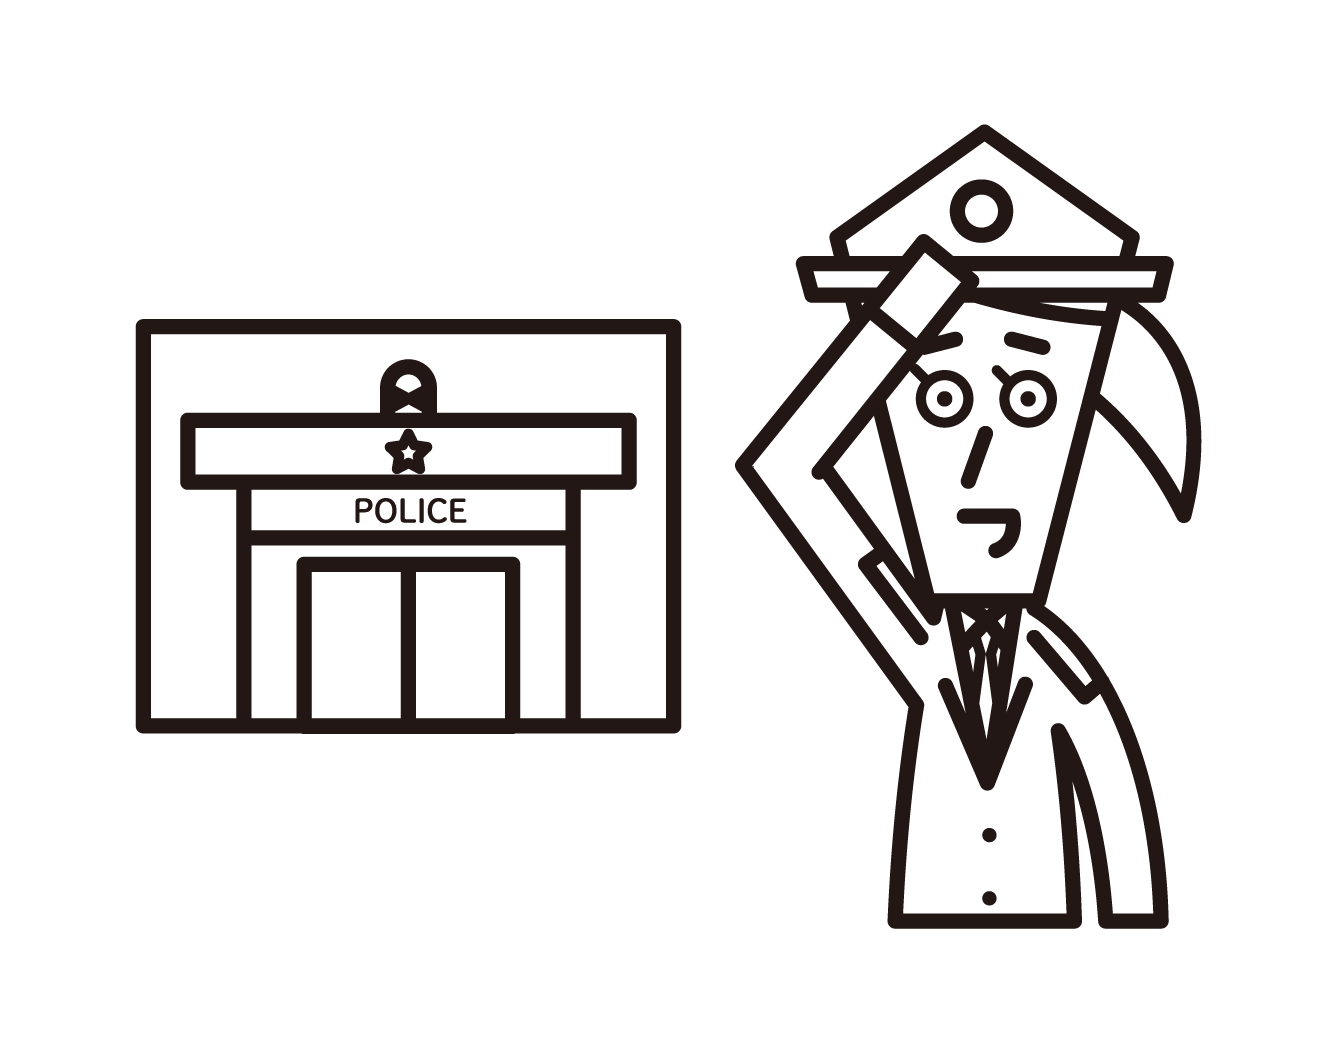 Illustration of a police officer (woman) saluteing in front of a police box